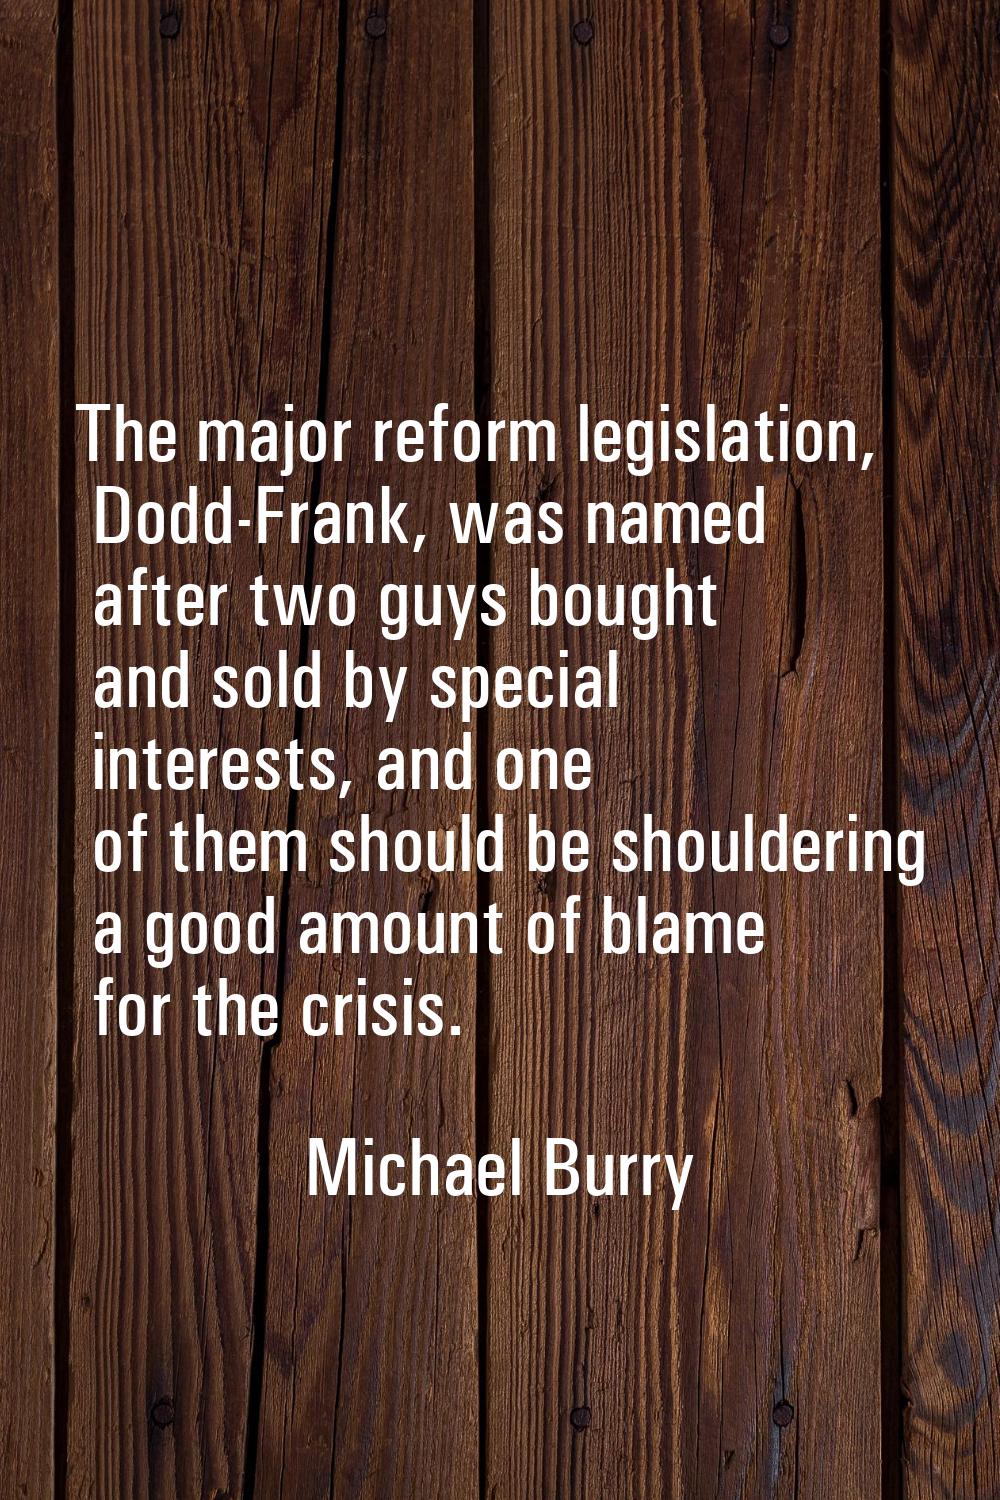 The major reform legislation, Dodd-Frank, was named after two guys bought and sold by special inter